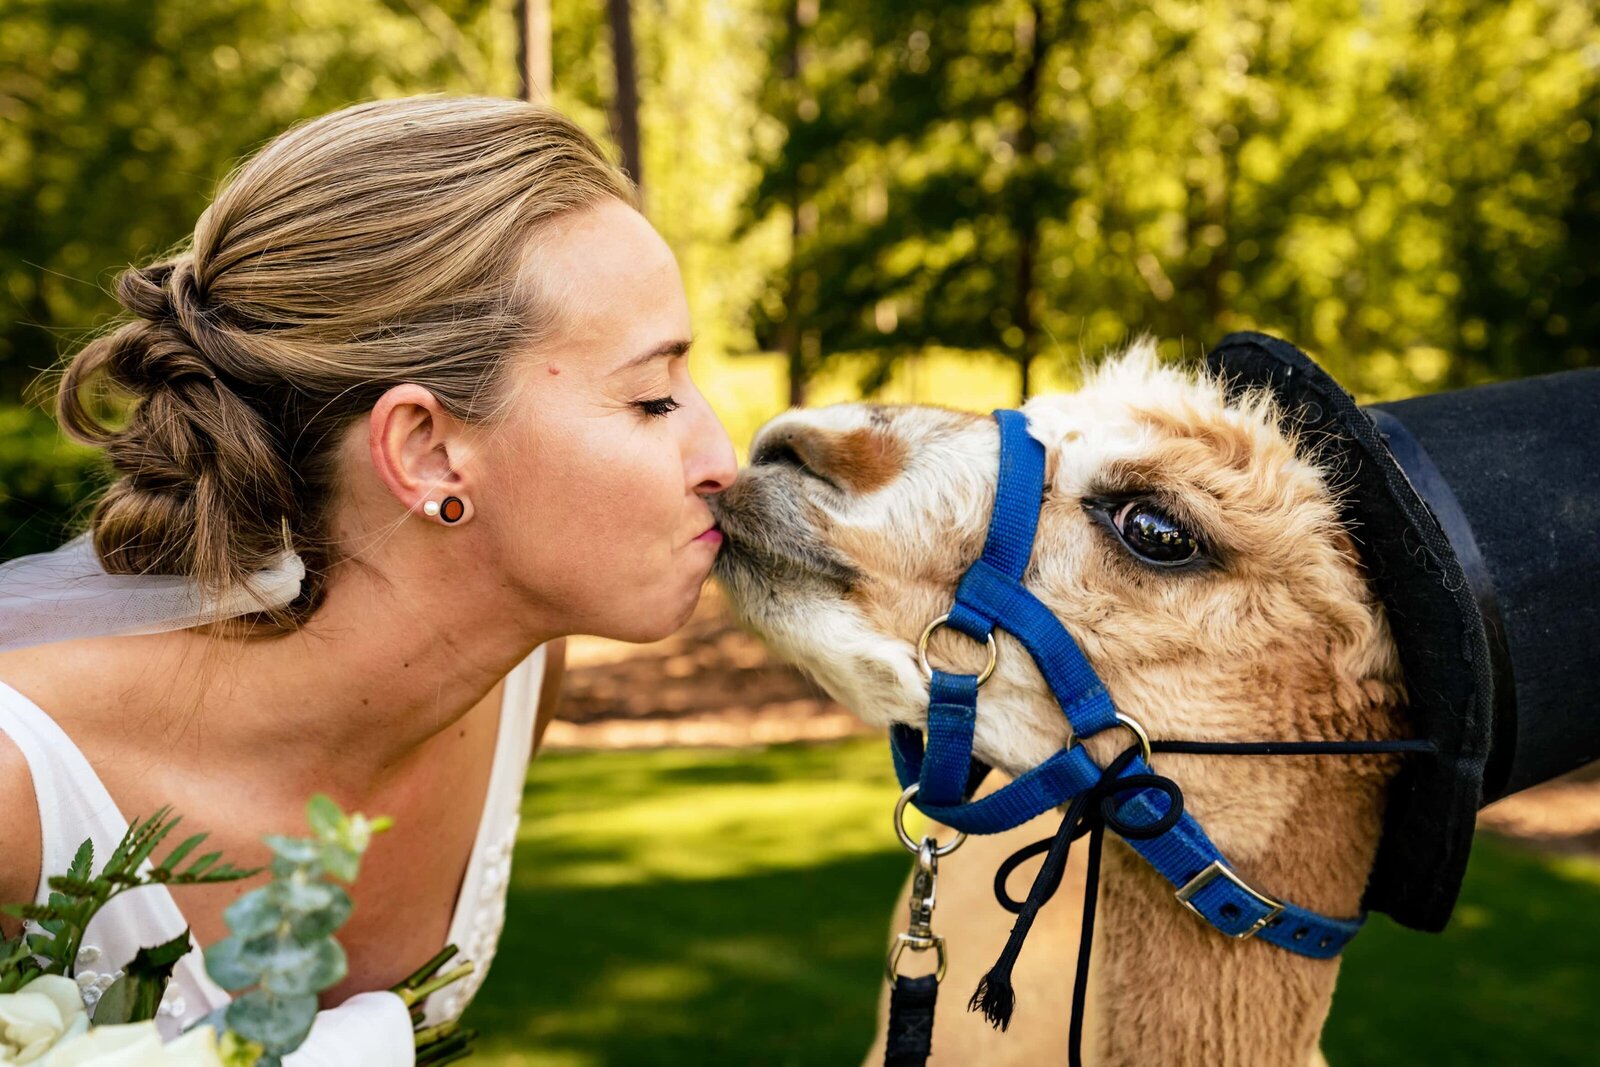 Woman in a wedding dress "kisses" an alpaca in a top hat at Chapel Hill Carriage House